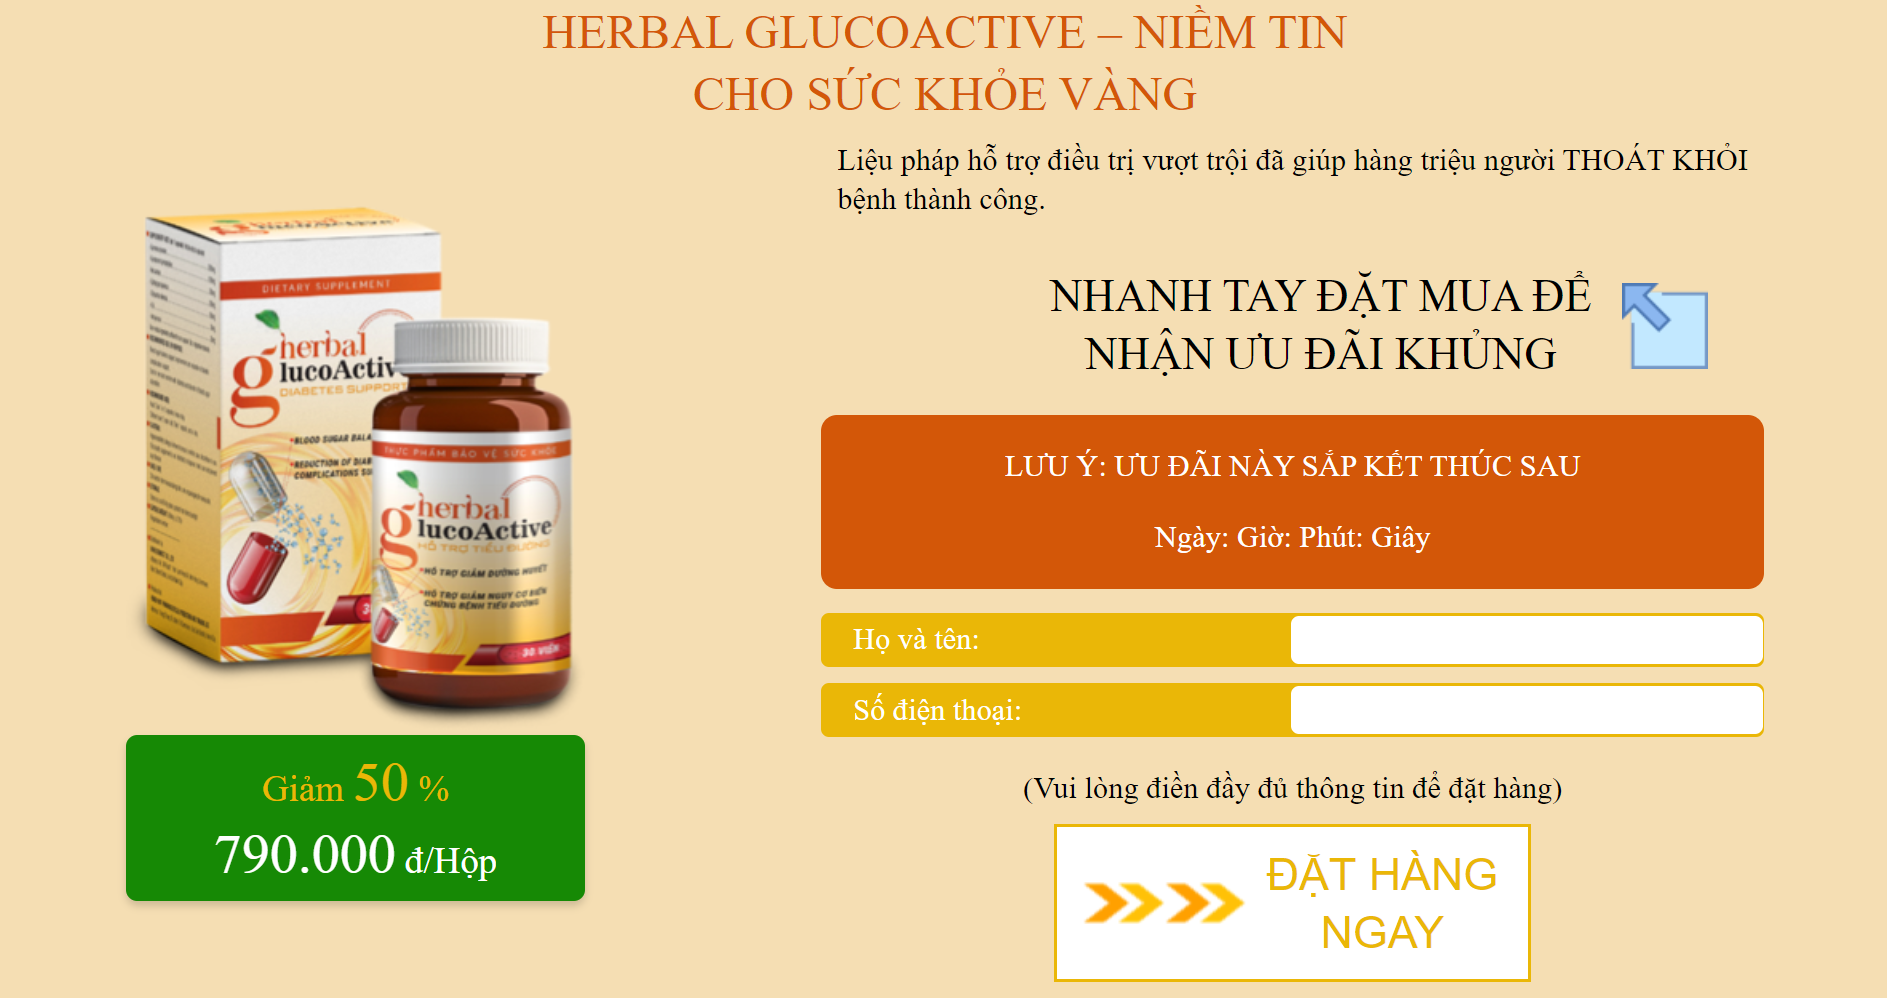 Glucoactive vn